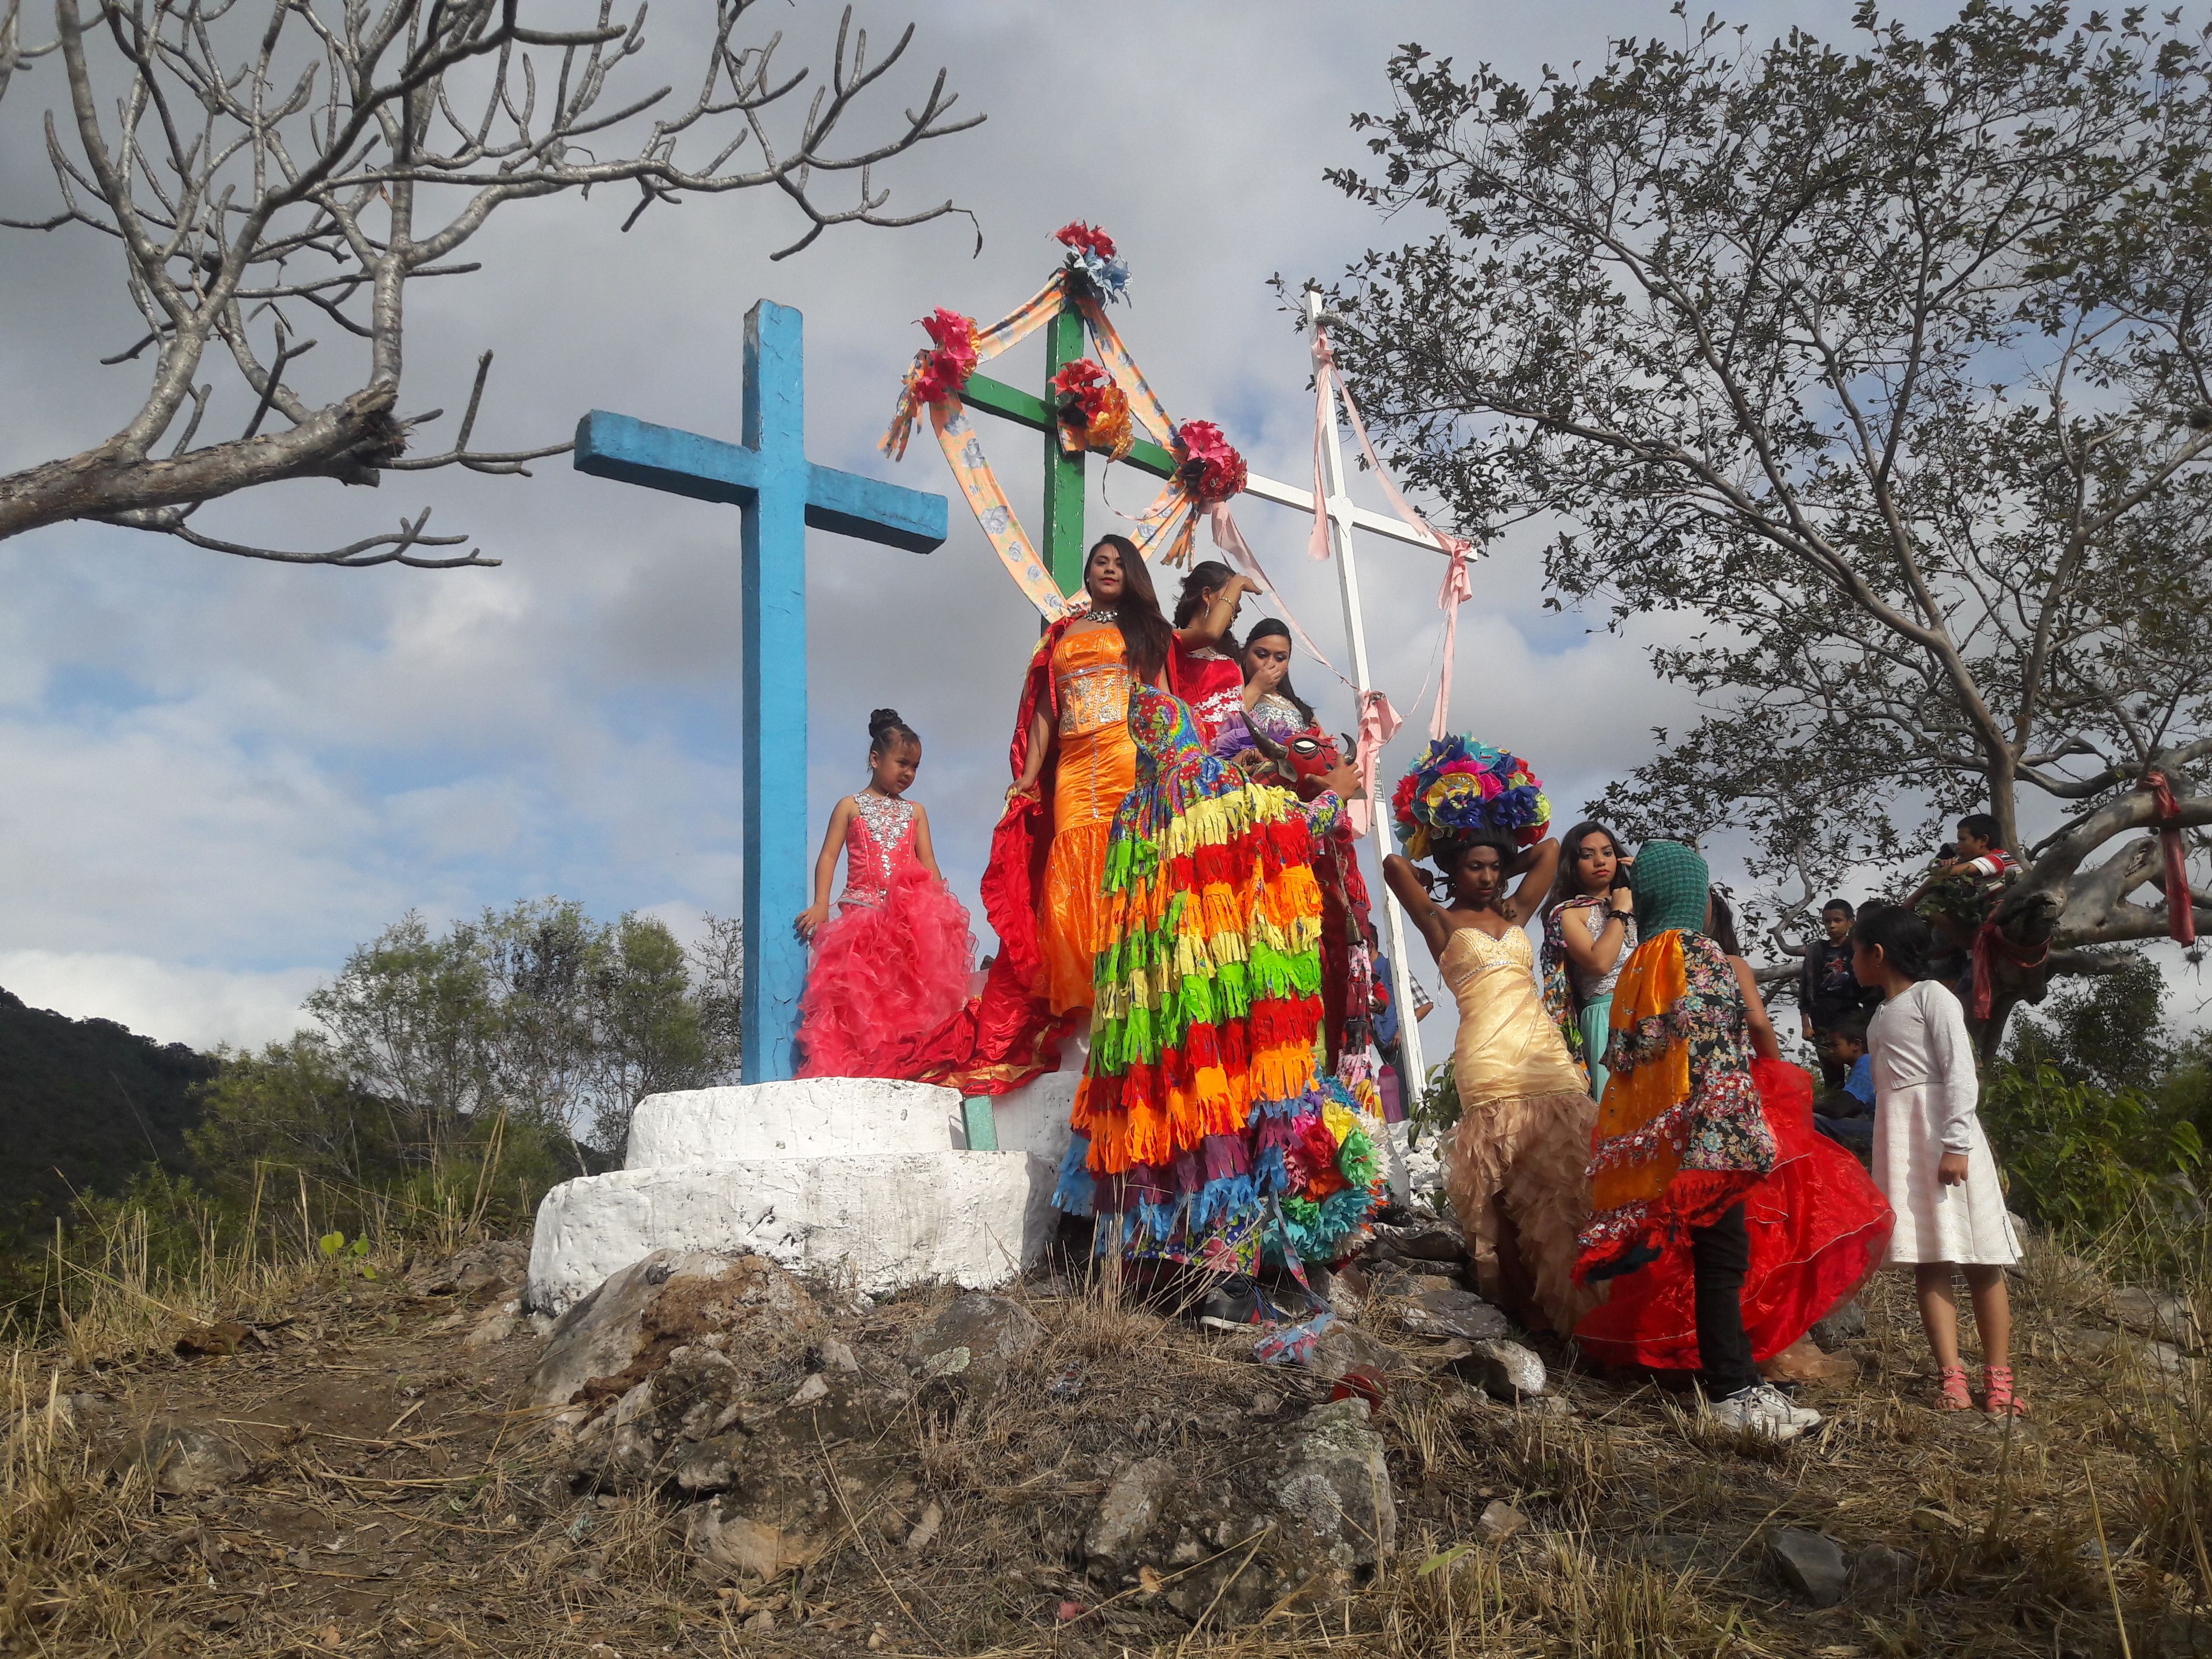 Las Cruces finally greet their cultural practitioners. Image by Jonathan Custodio. Mexico, 2018.